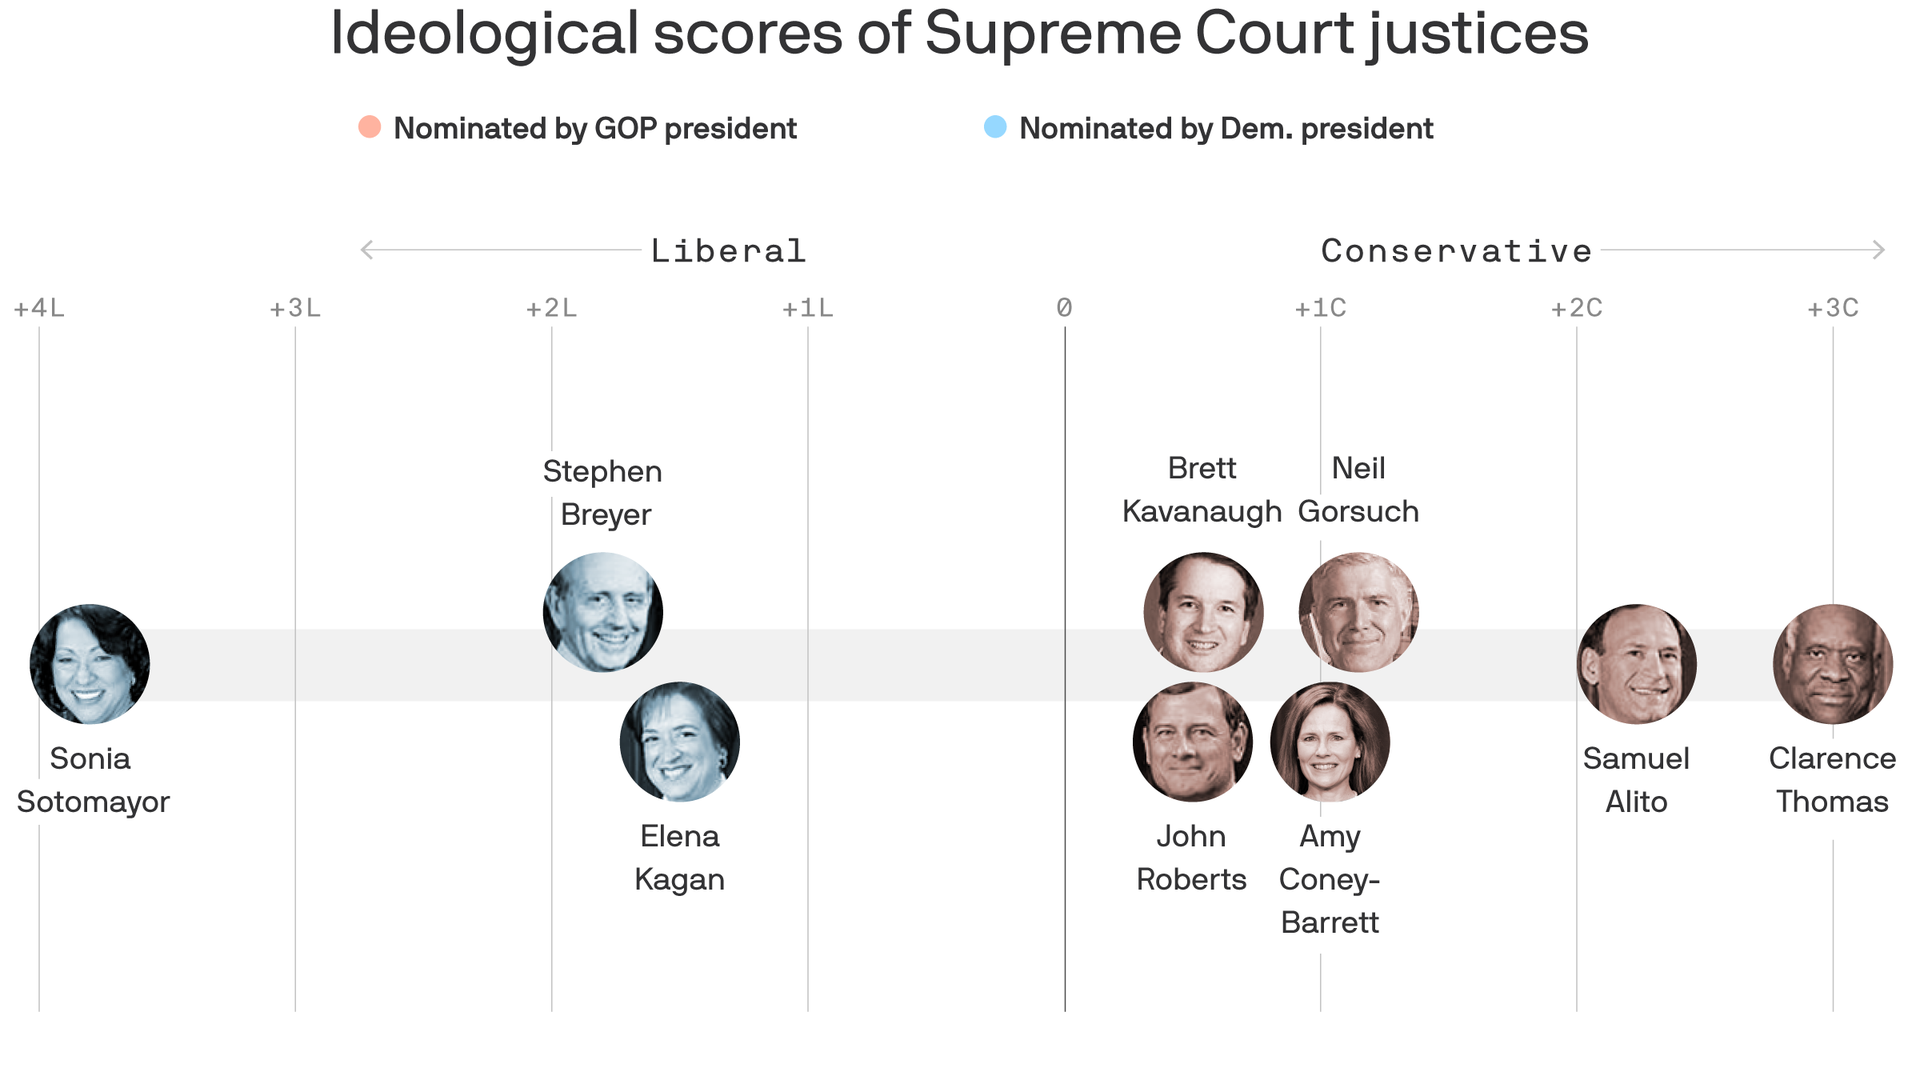 Chart showing ideological standings of Supreme Court justices